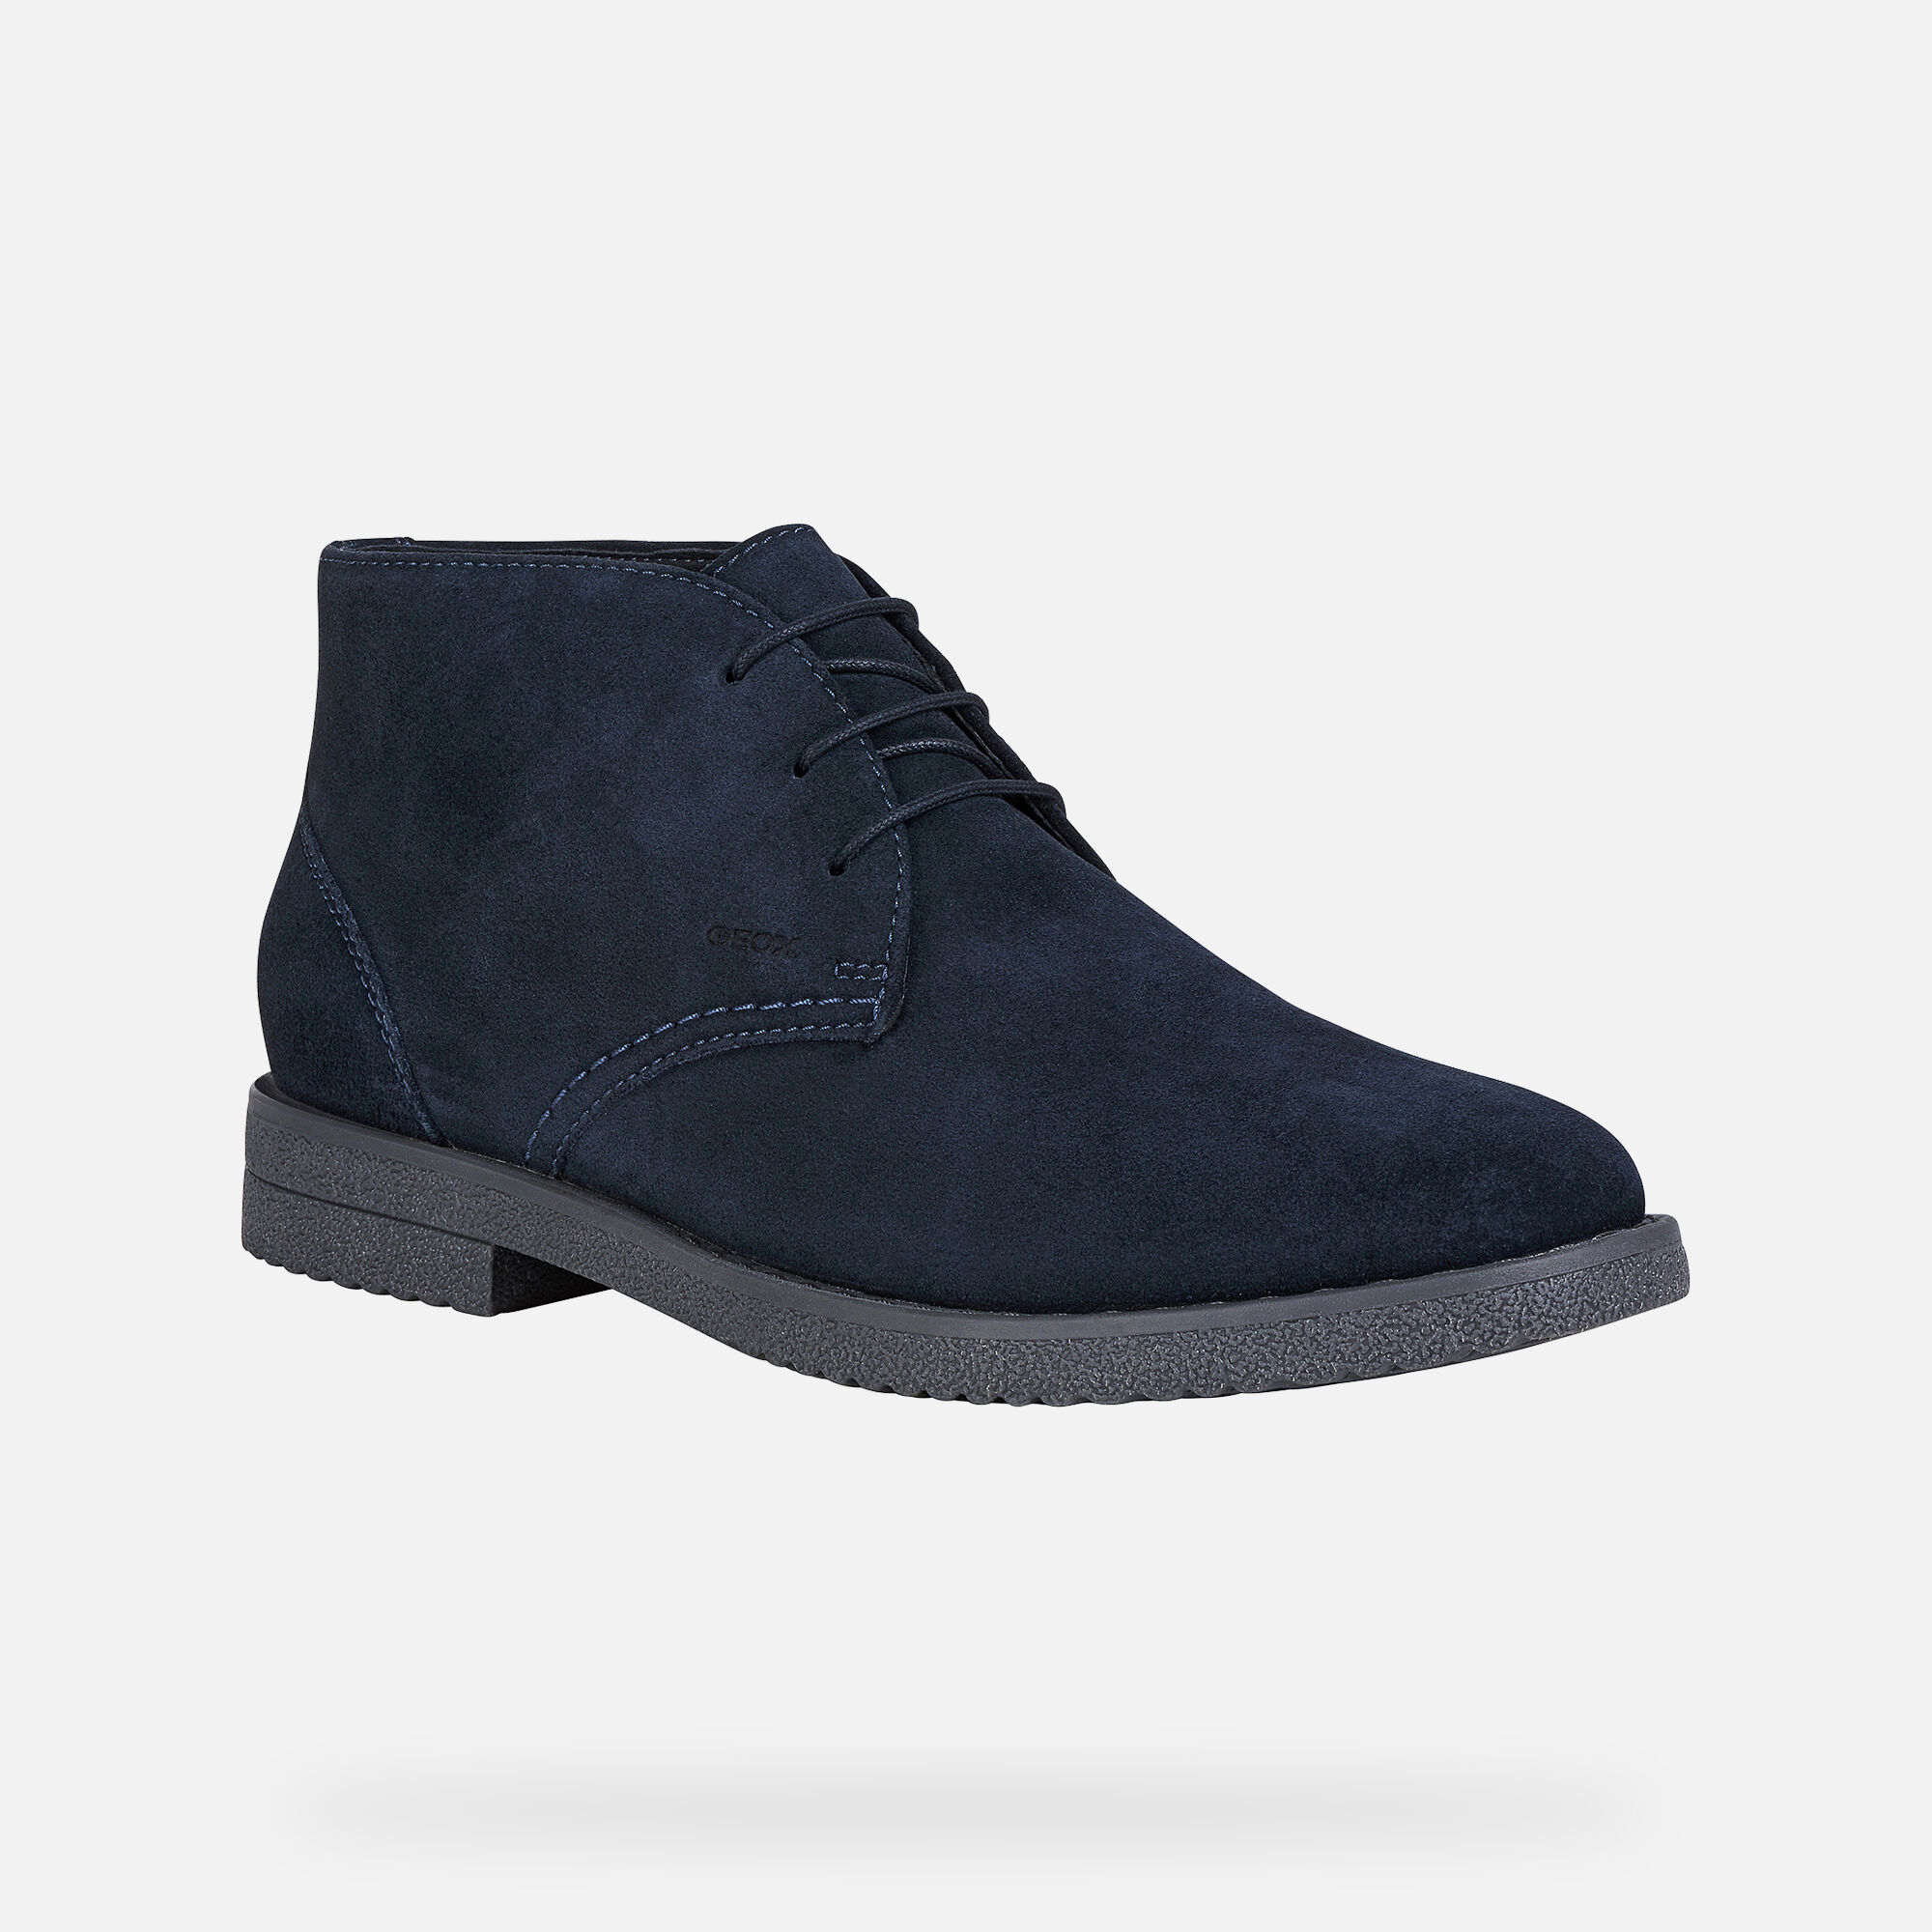 Geox BRANDLED Man: Navy blue Shoes | Geox® Entry Price